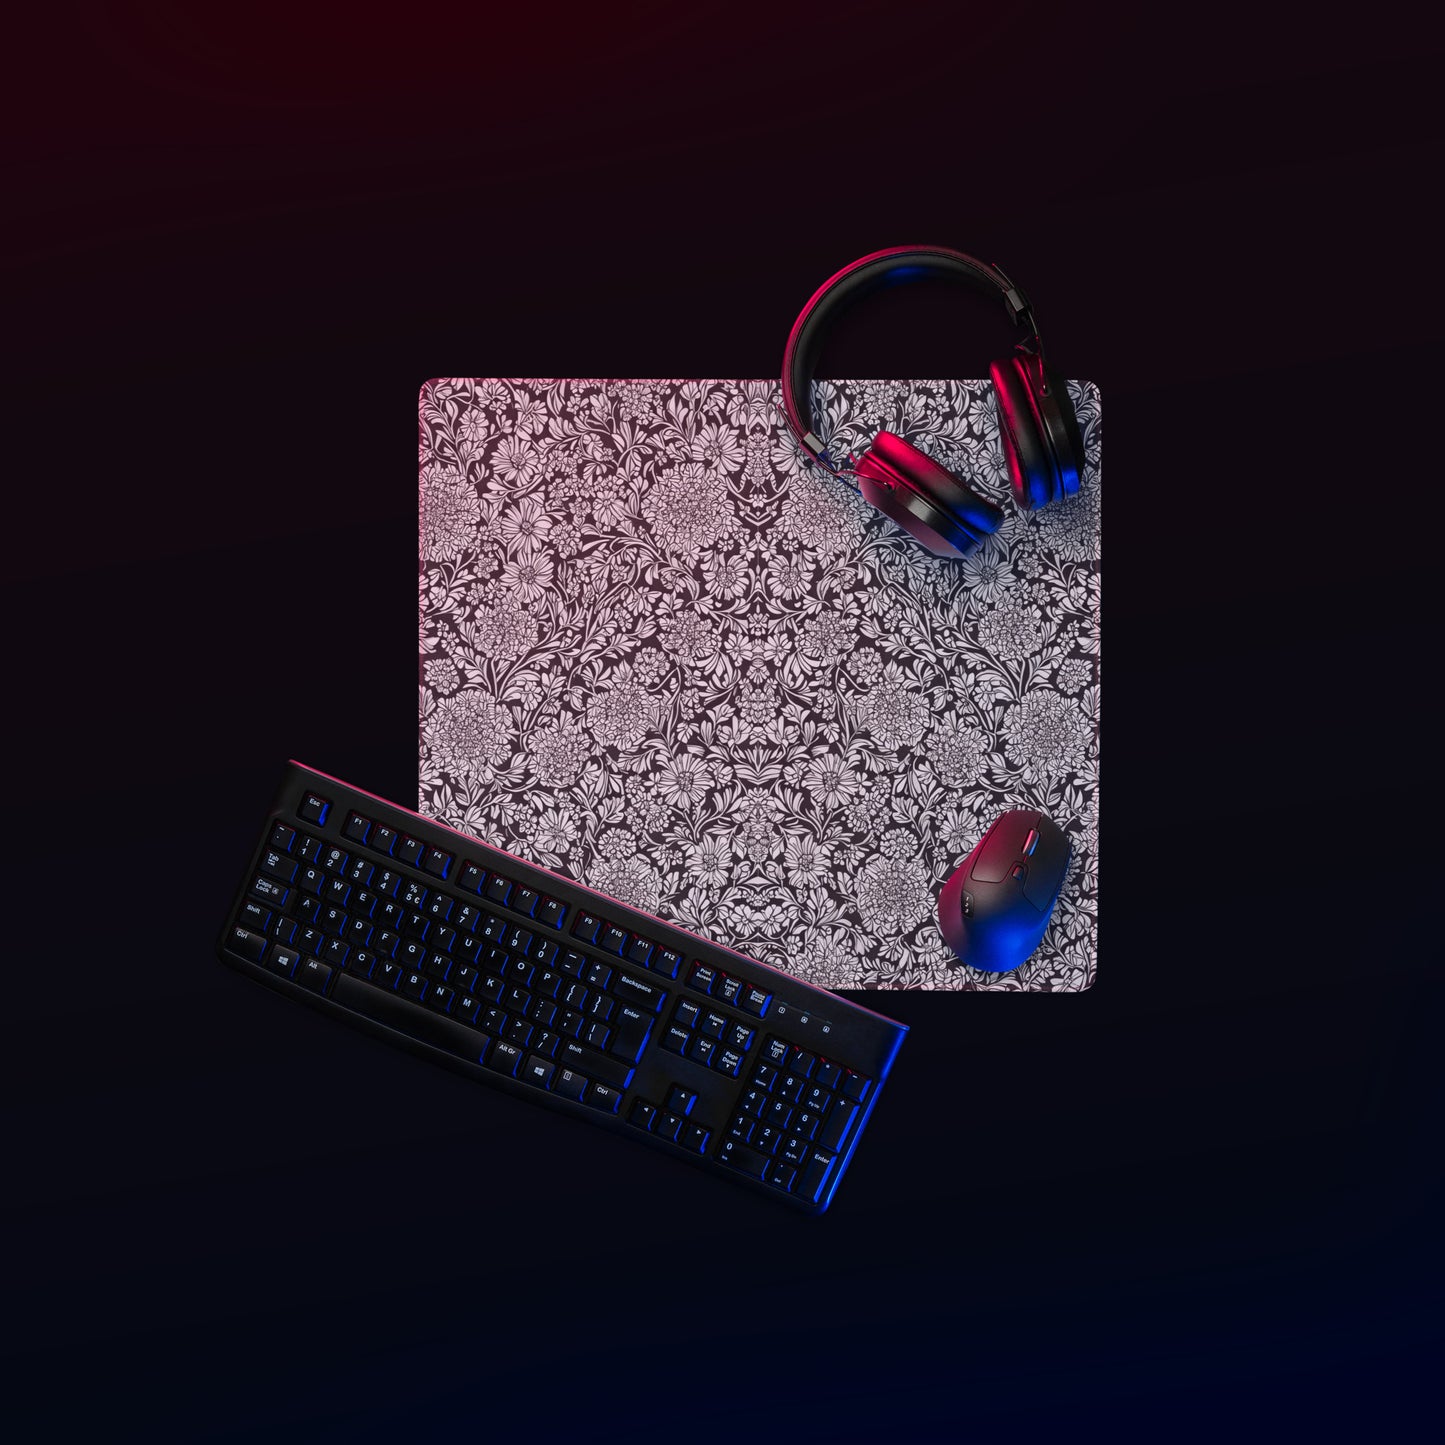 Monochrome Floral : Gaming mouse pad